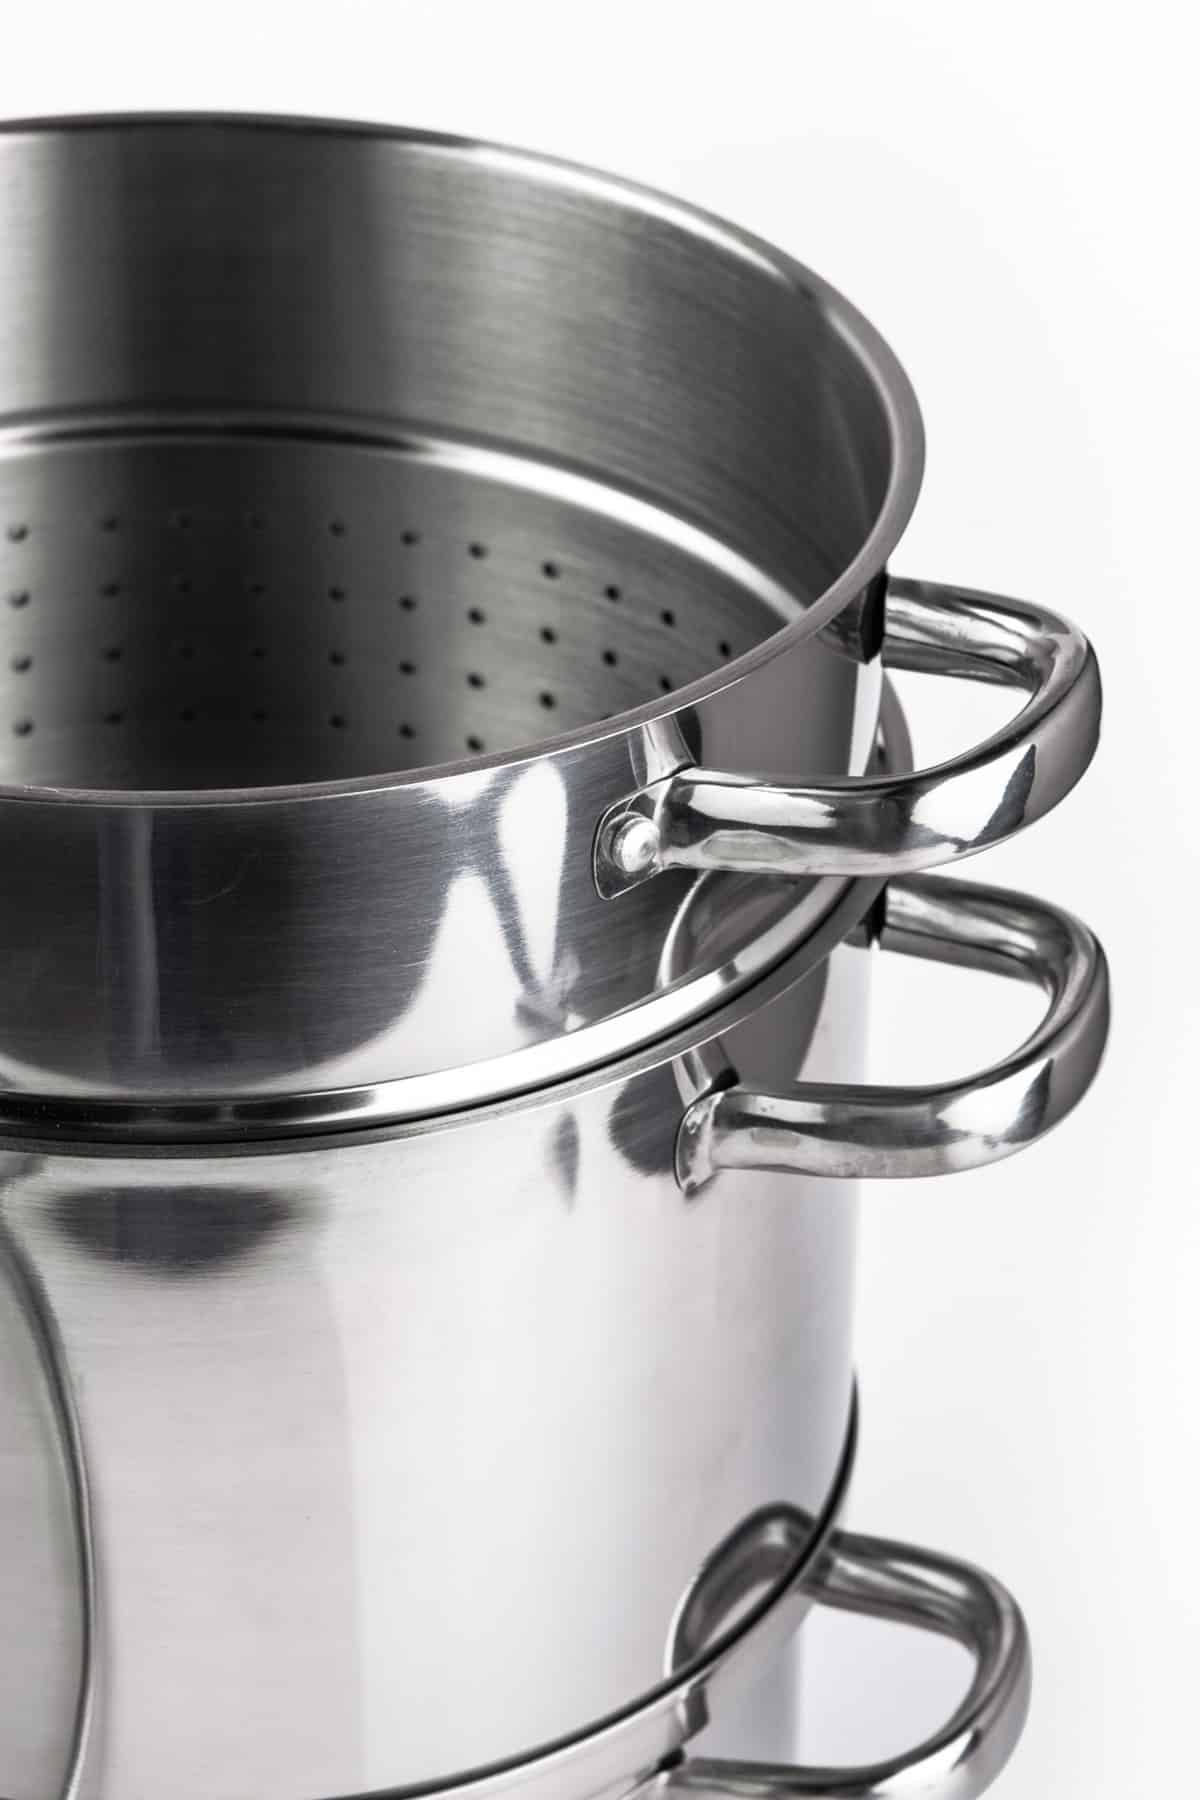 Stainless steel steamer pot stacked.